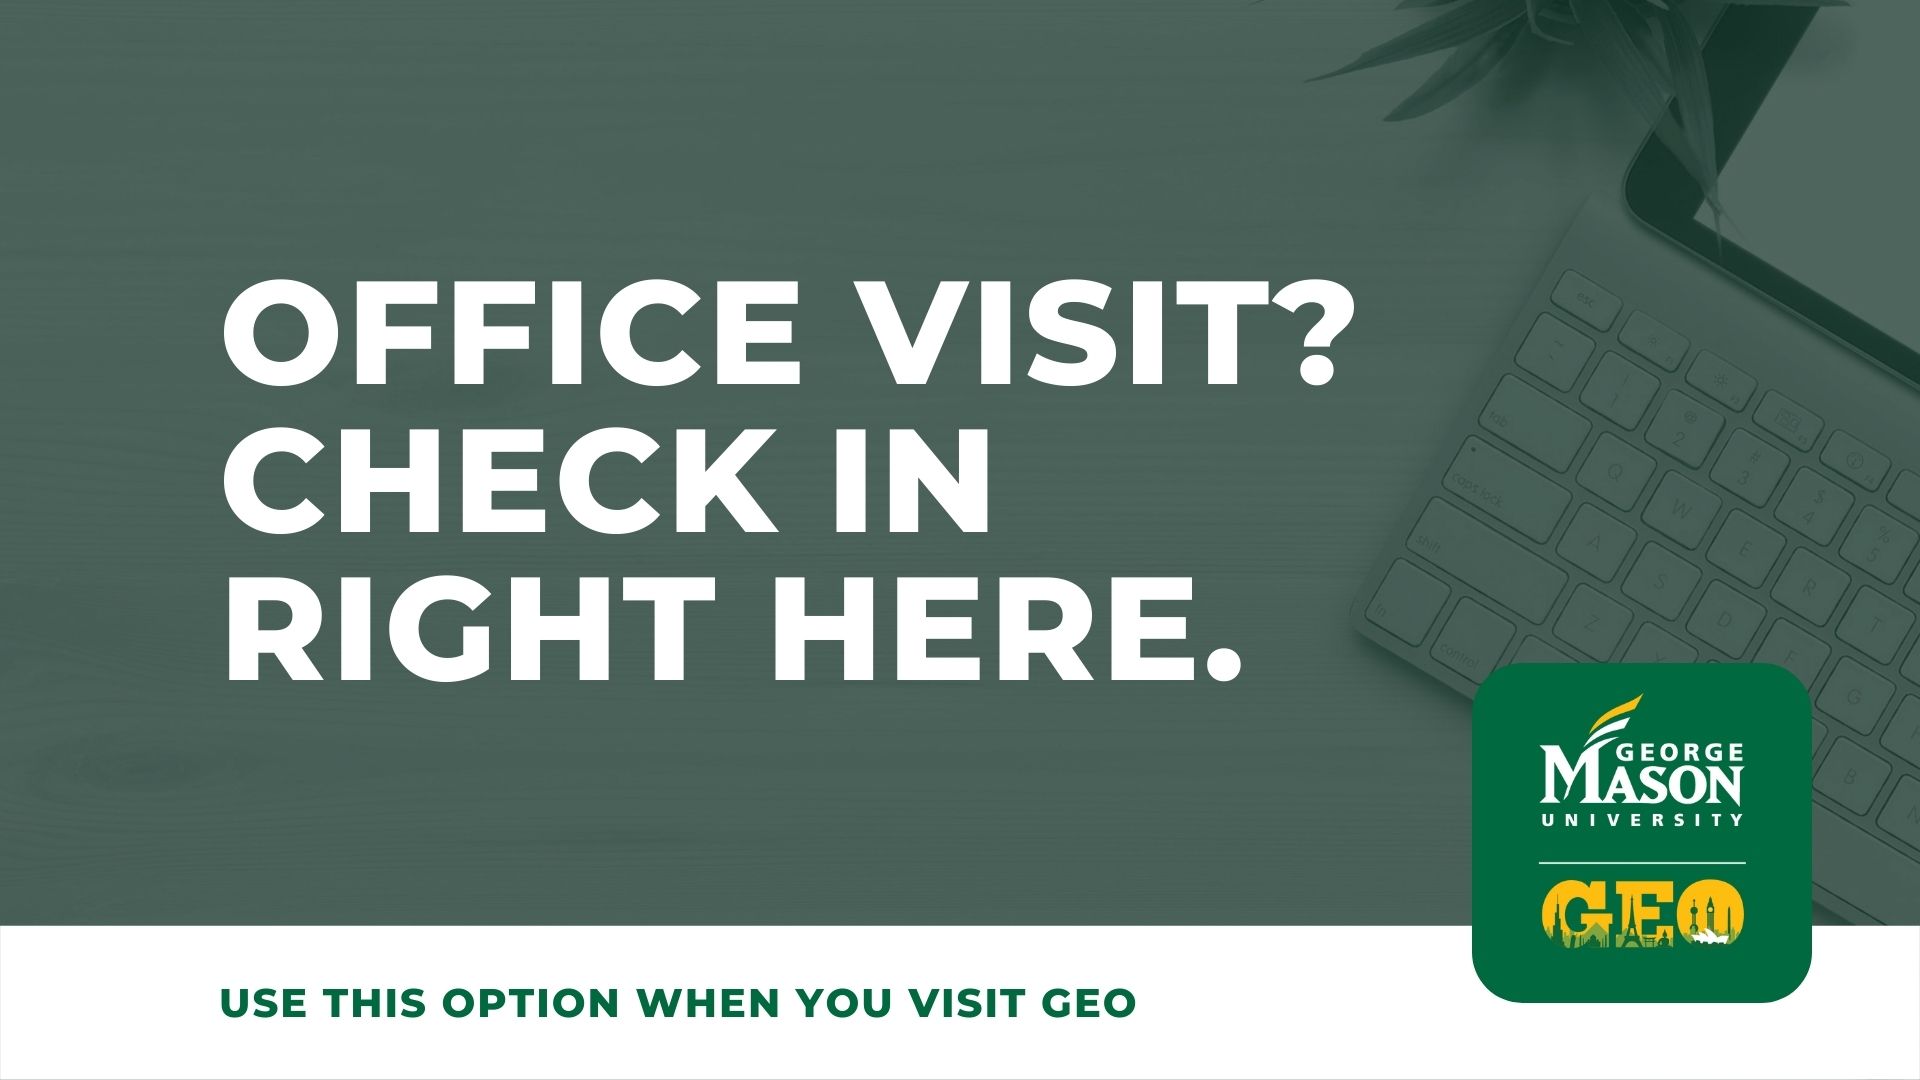 Check in for an office visit